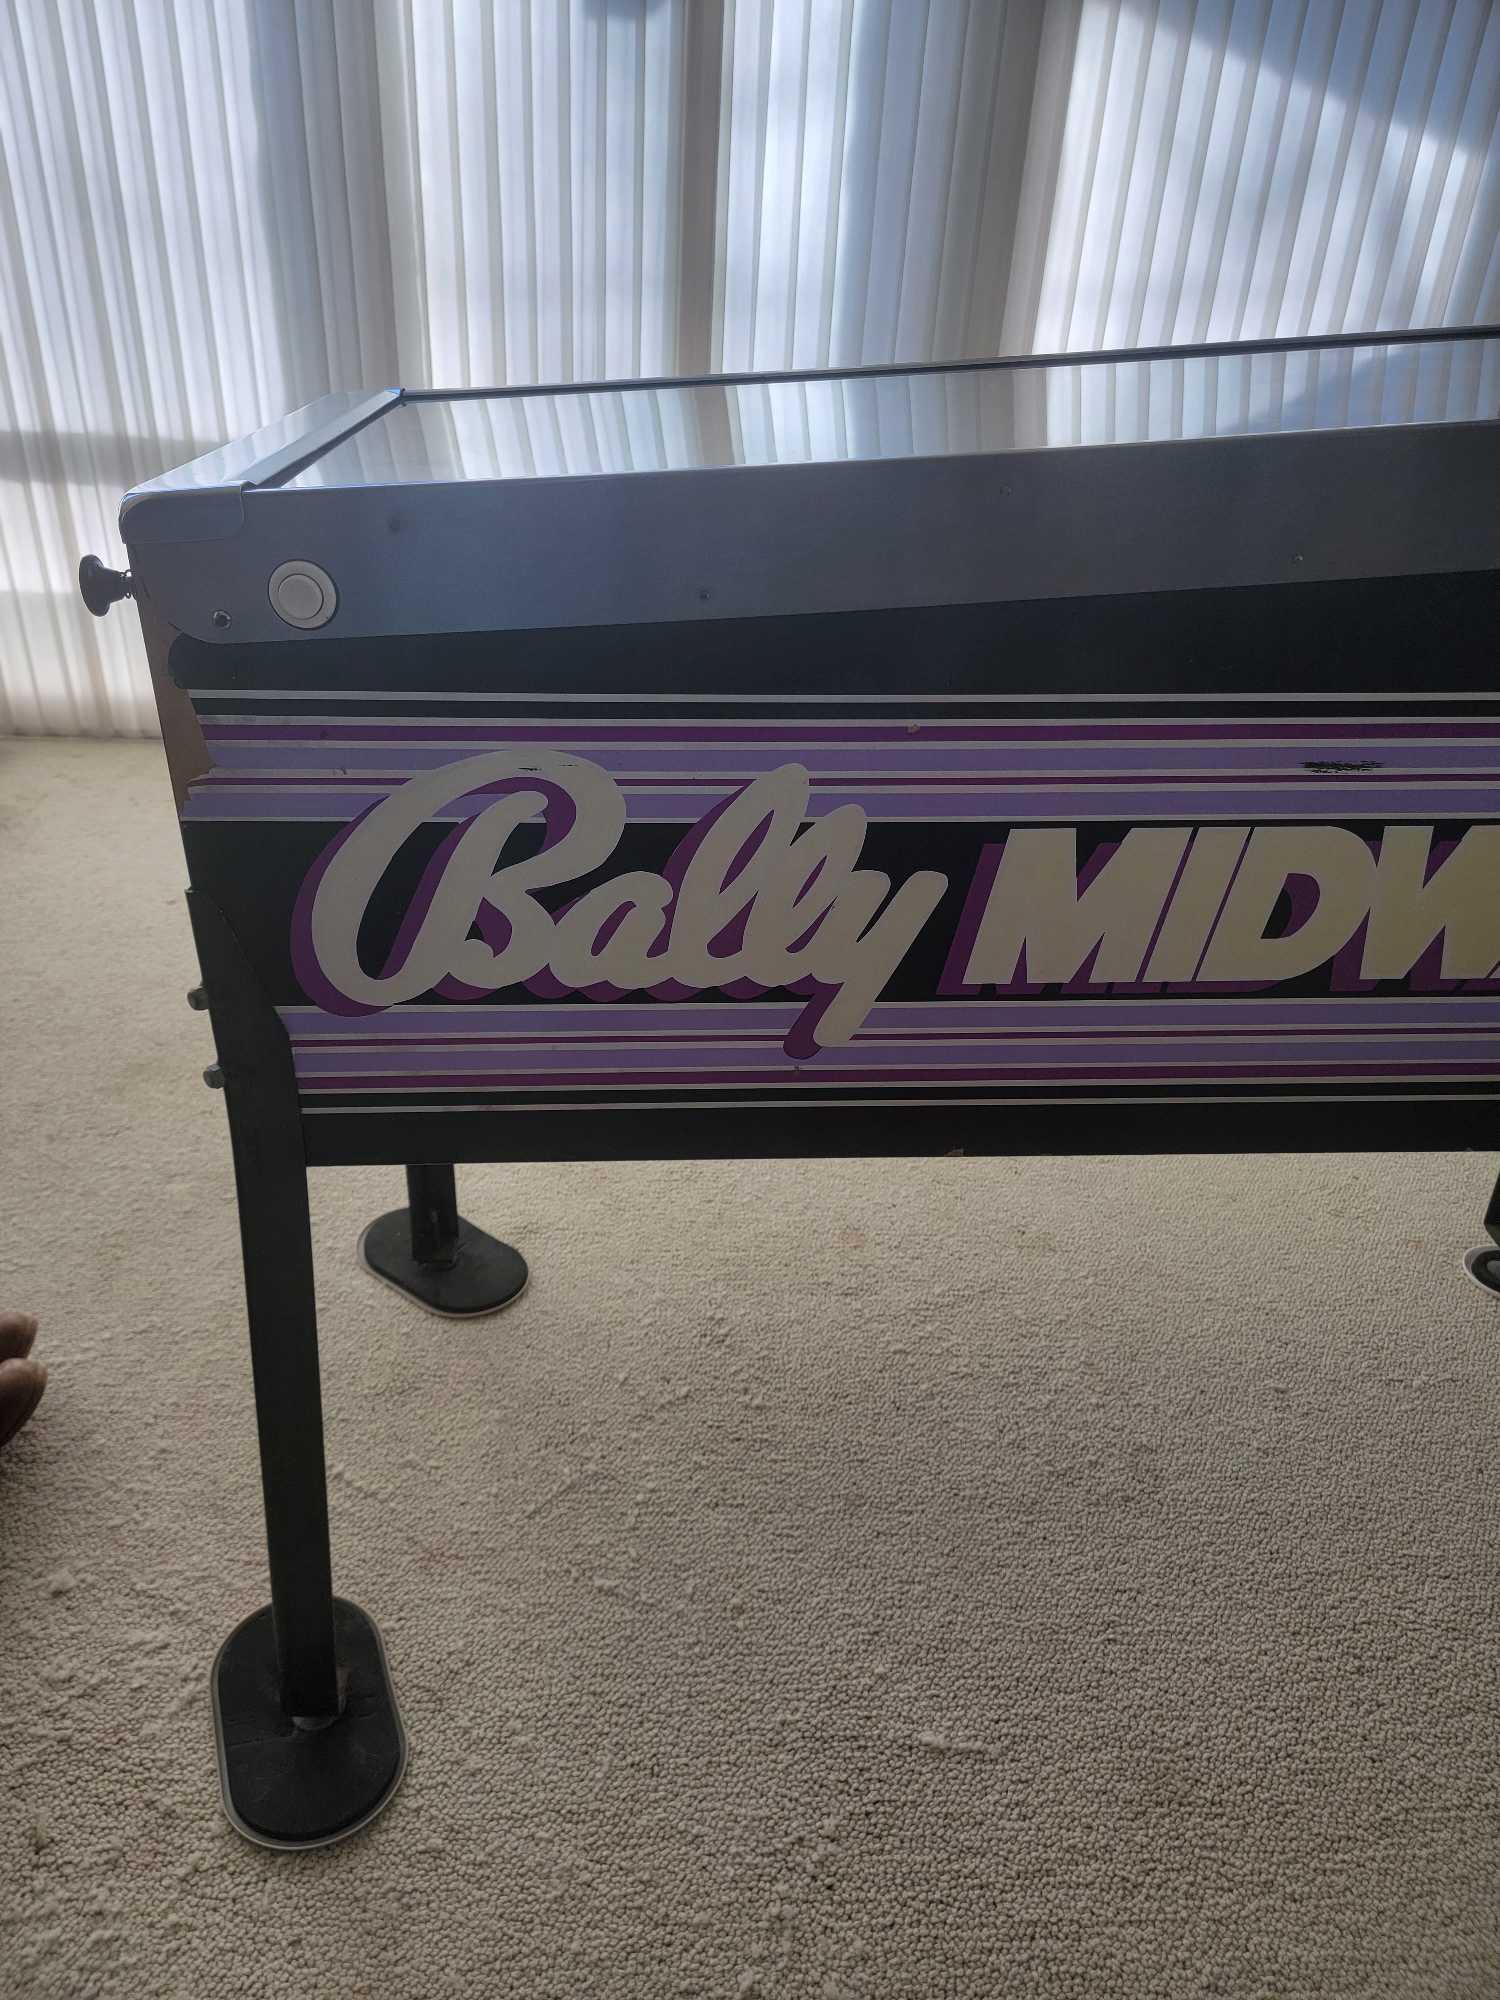 1986 Bally Midway Lady Luck Solid State Pinball Machine only 500 made